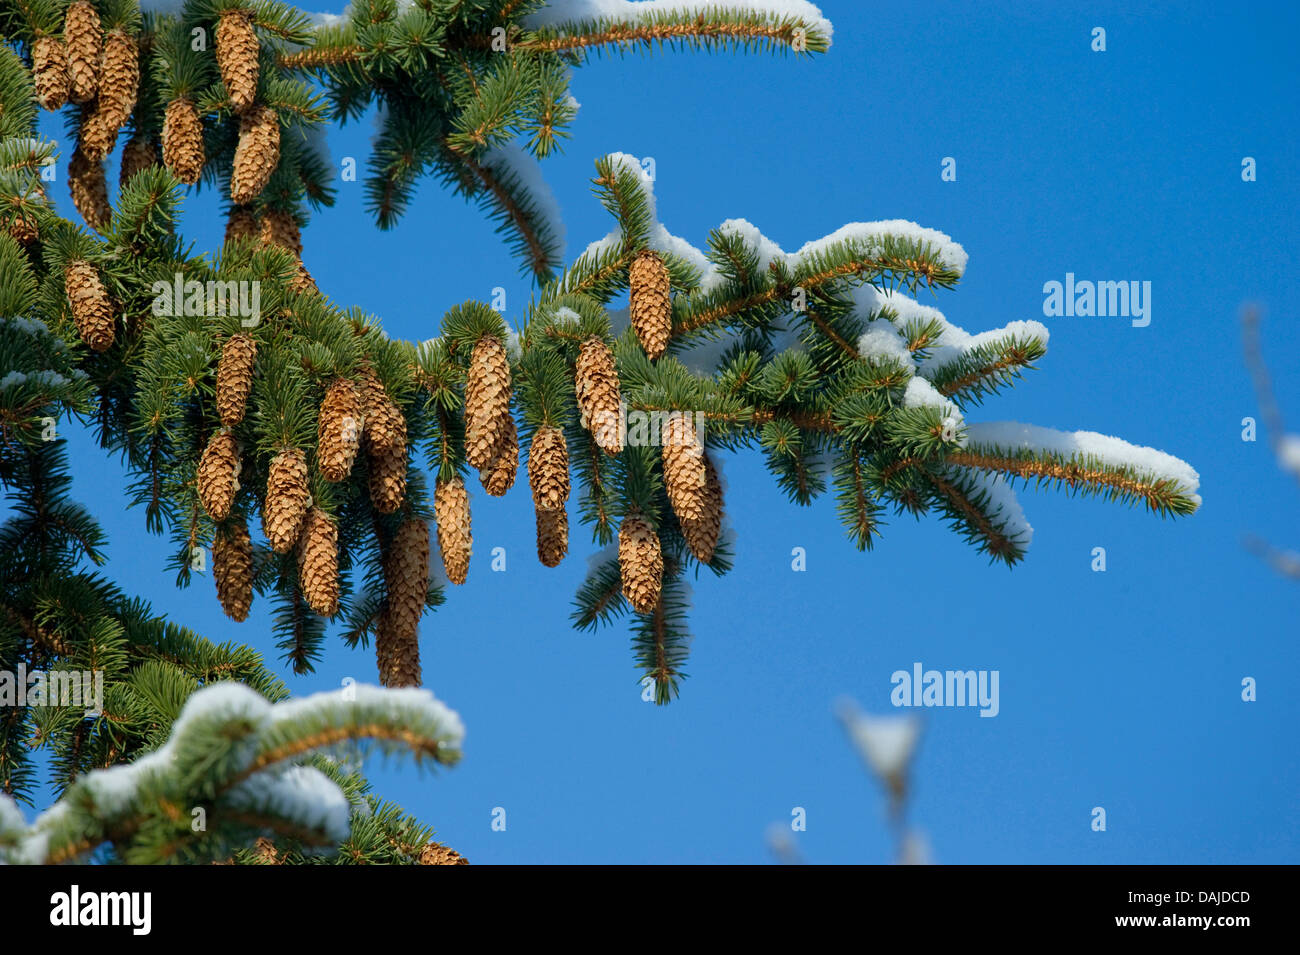 Norway spruce (Picea abies), snow-covered branch wi9th cones, Germany Stock Photo